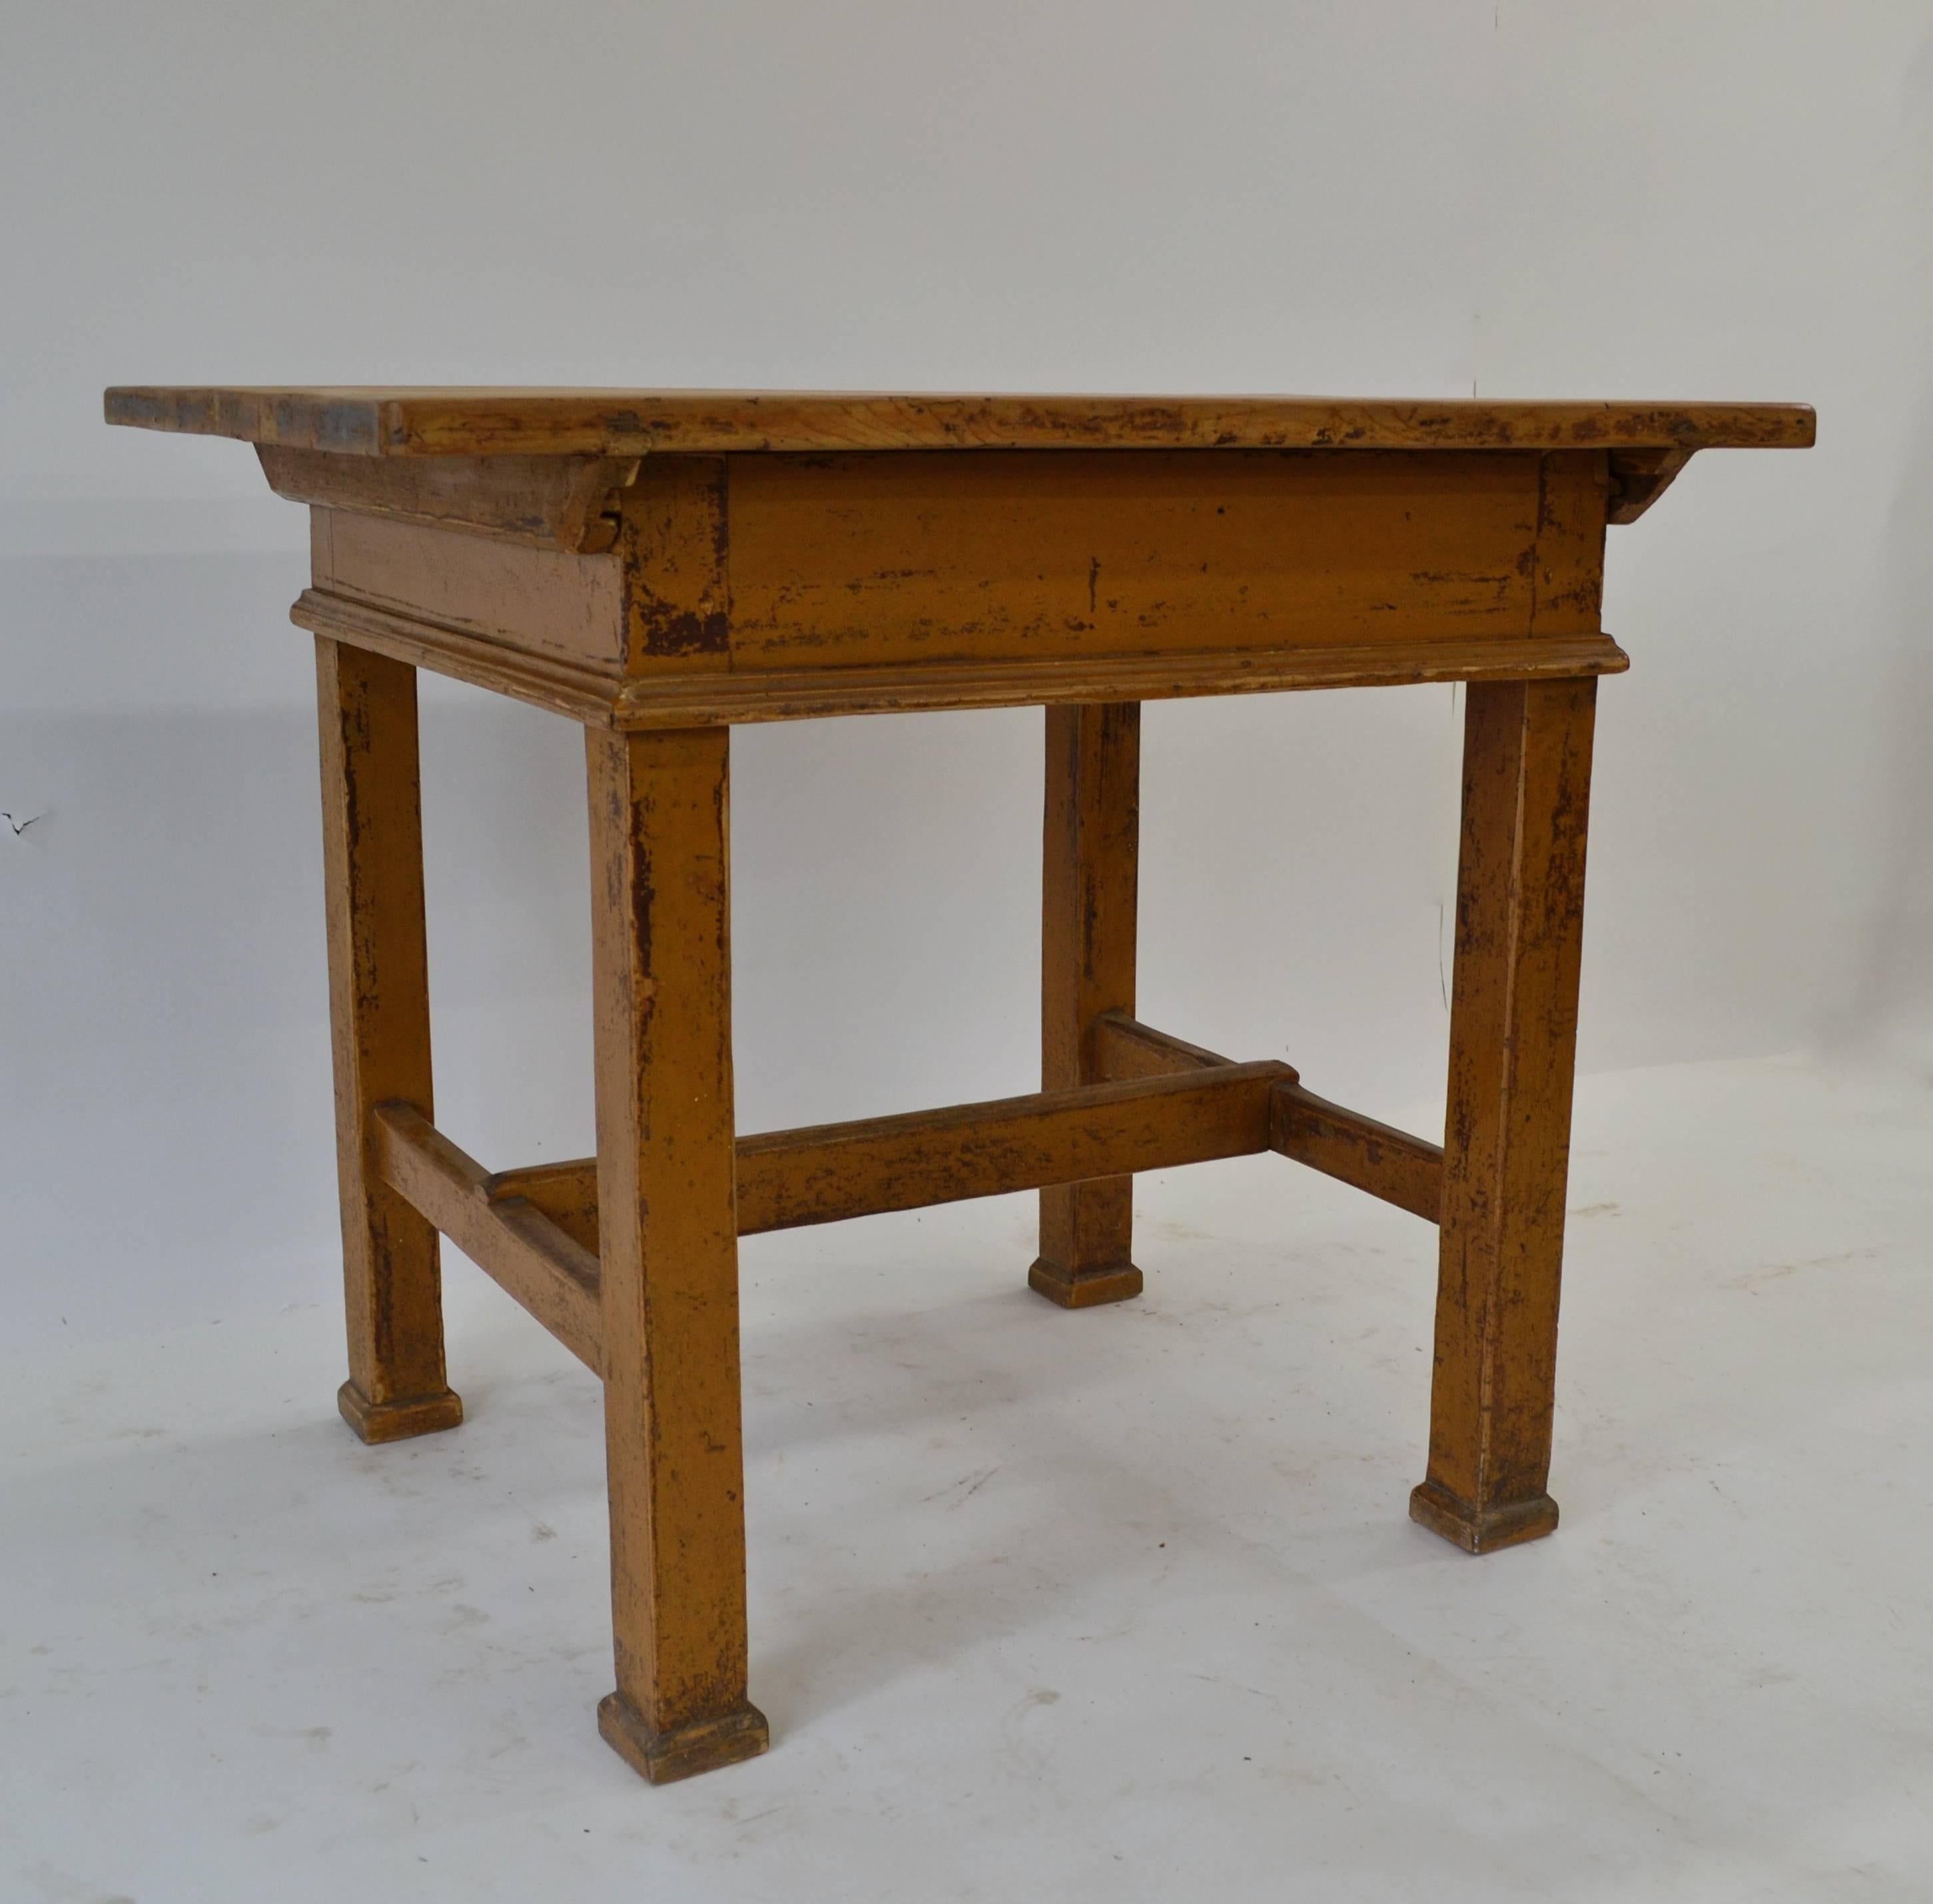 This is another of our charming rustic tables from central Europe. This one has a three board top over an inch thick with wooden cleats dovetailed into its underside. These keep the top nice and flat and allow the boards to expand and contract